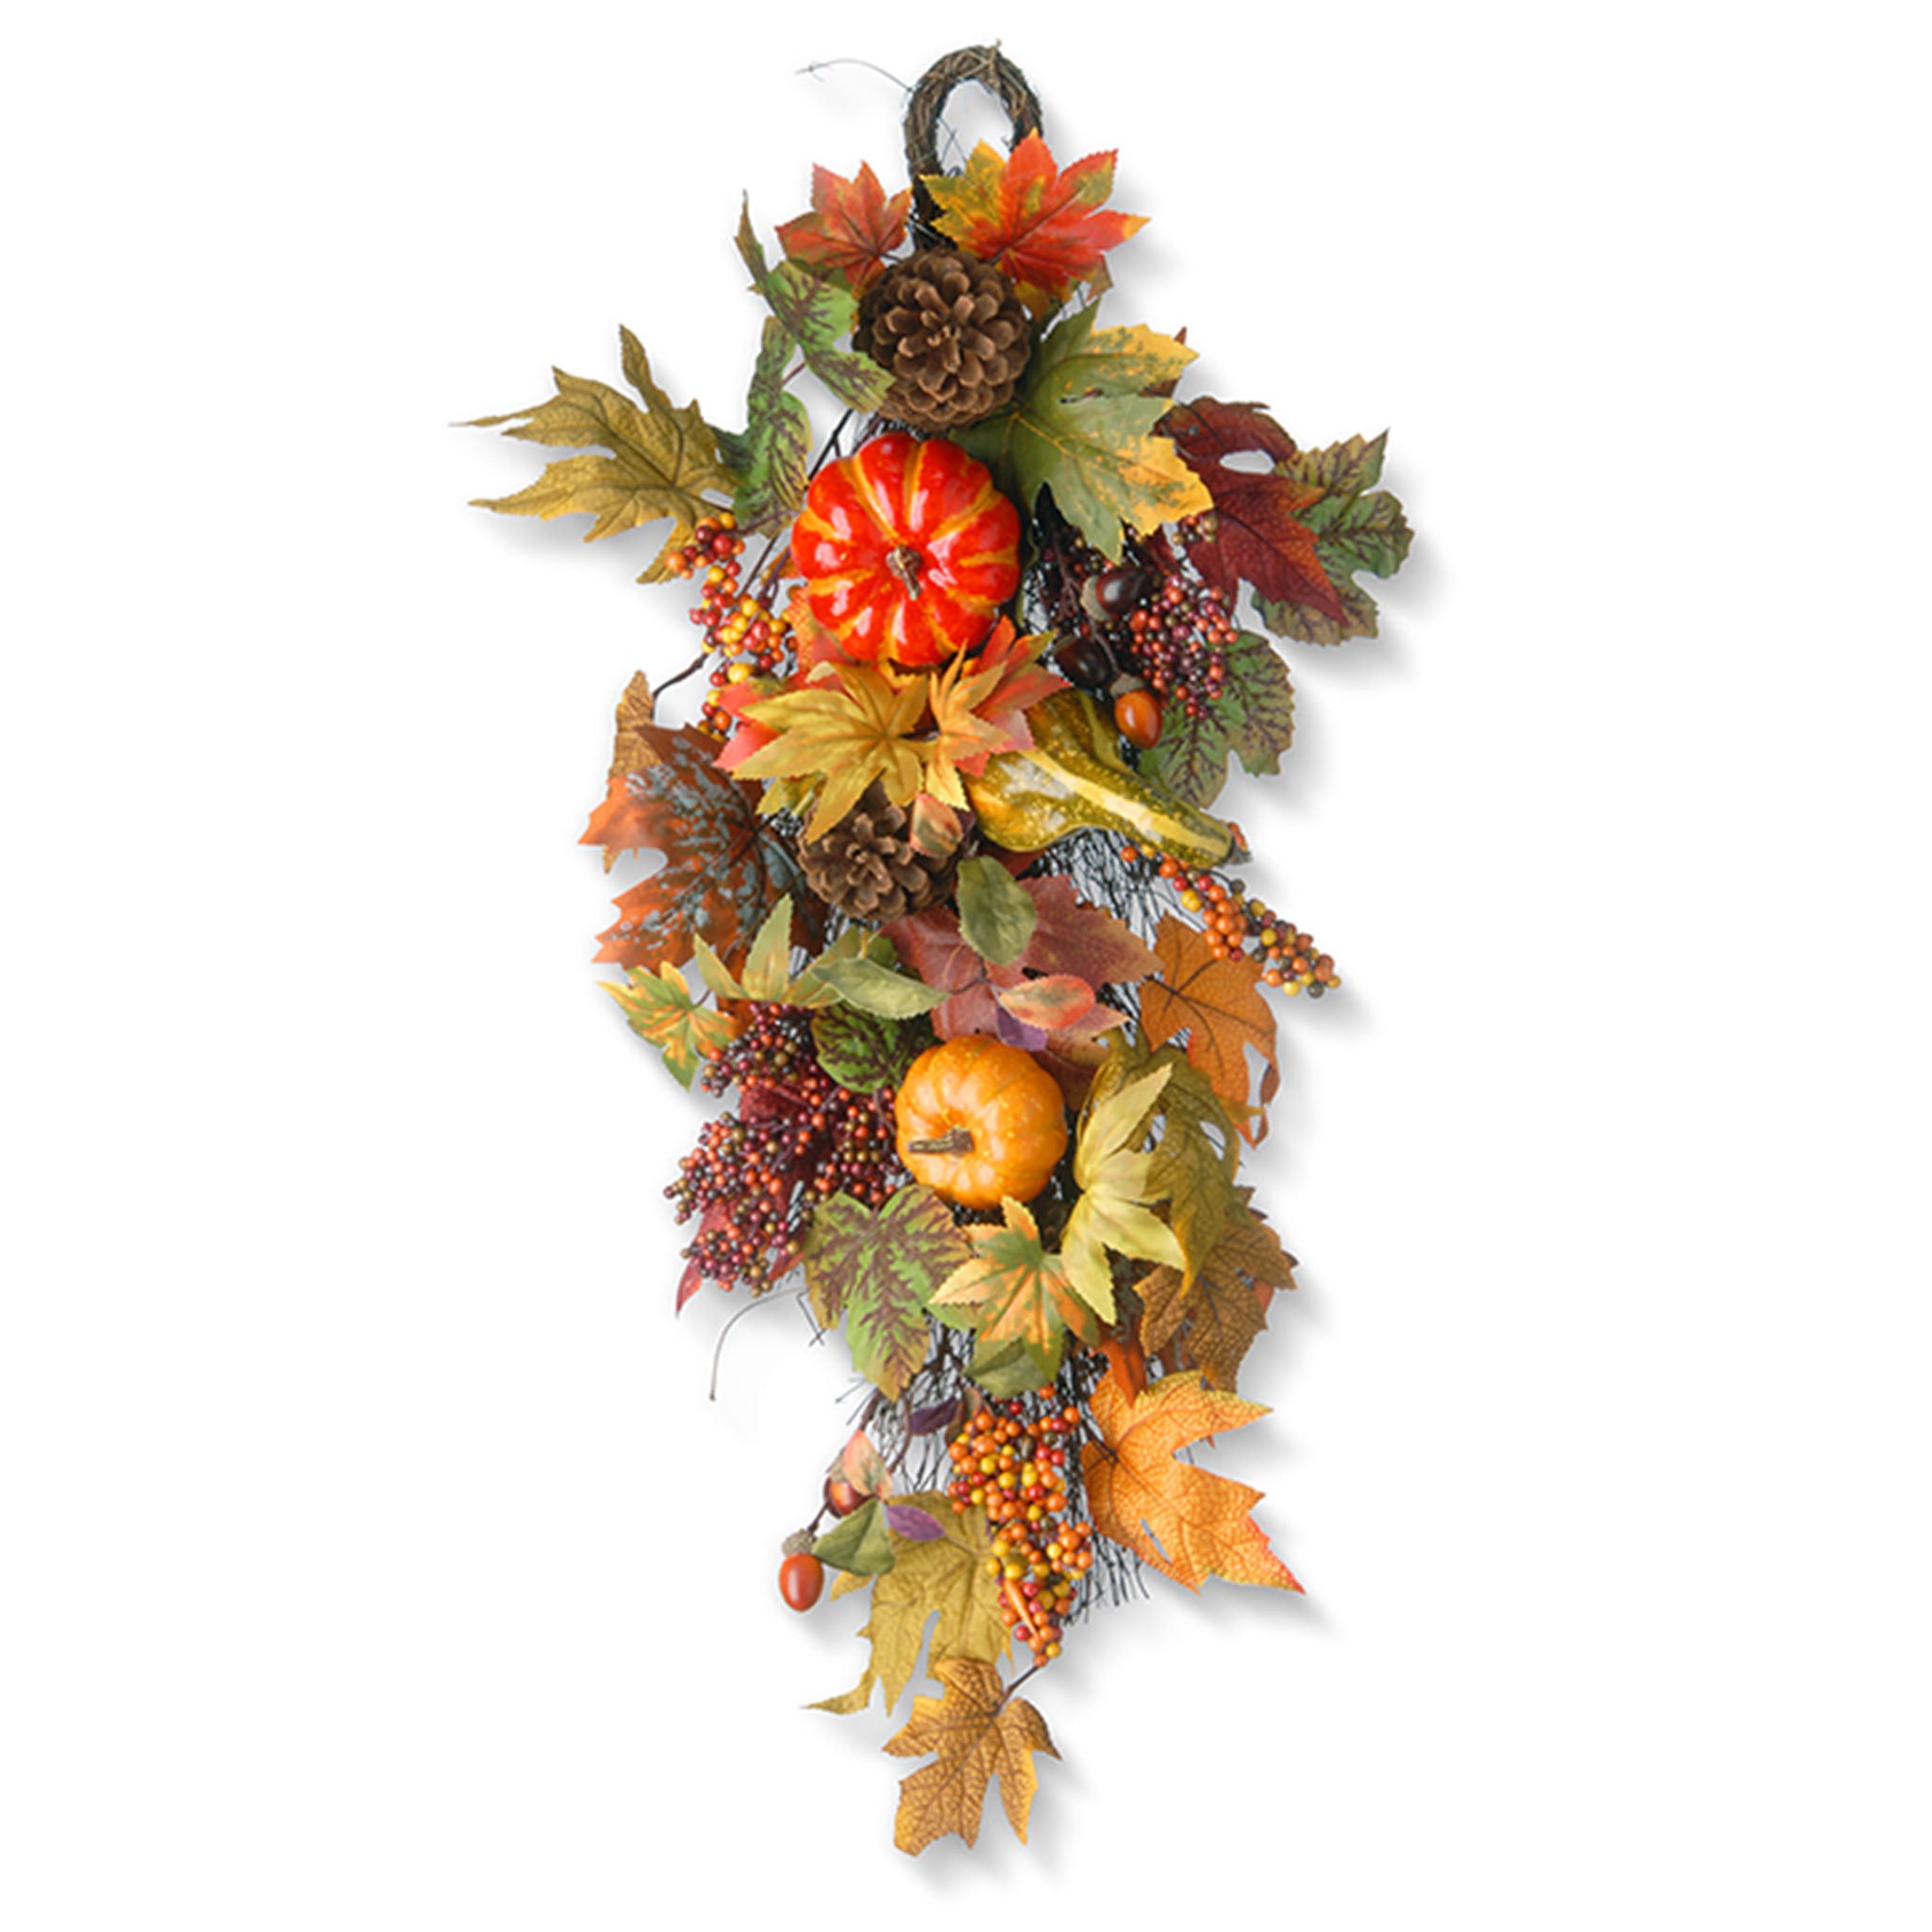 Artificial Fall Teardrop Hanging Wall Decoration, Decorated with Pumpkins, Gourds, Pinecones, Berry Clusters, Maple Leaves, Autumn Collection, 26 in